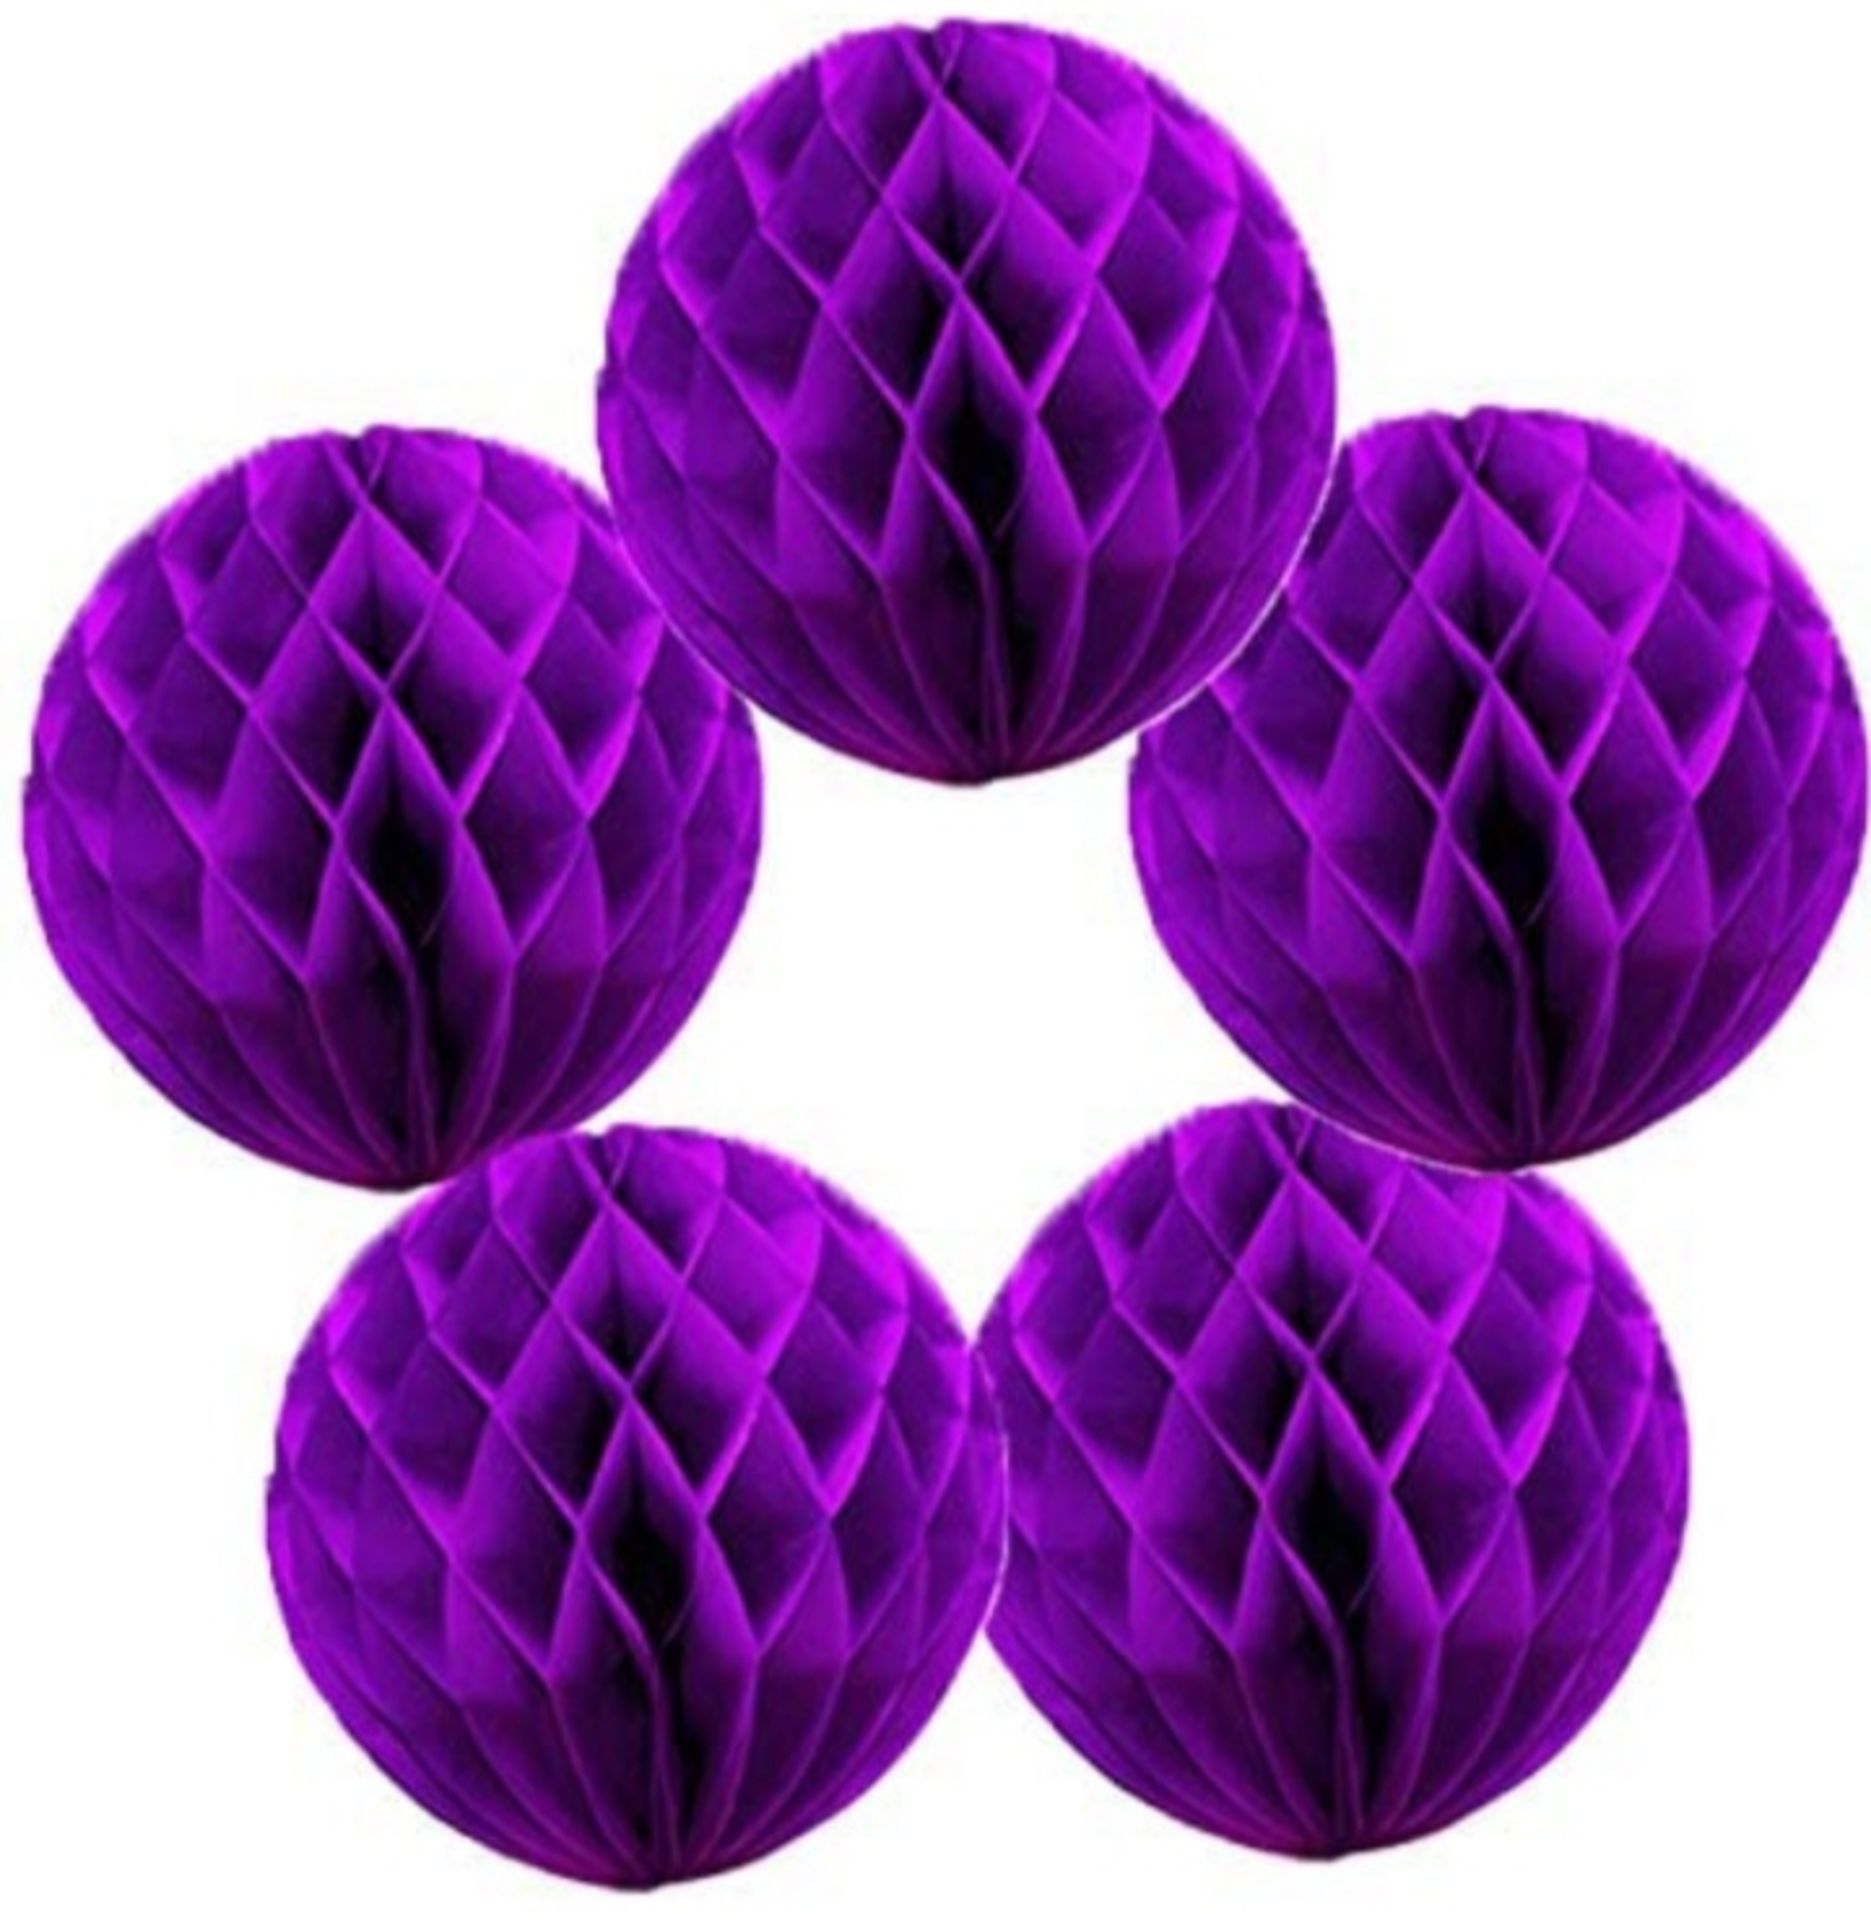 X 60 BRAND NEW 30CM PURPLE PAPER HONEYCOMB BALLS FOR WEDDING, BIRTHDAY, AND FESTIVAL PARTY